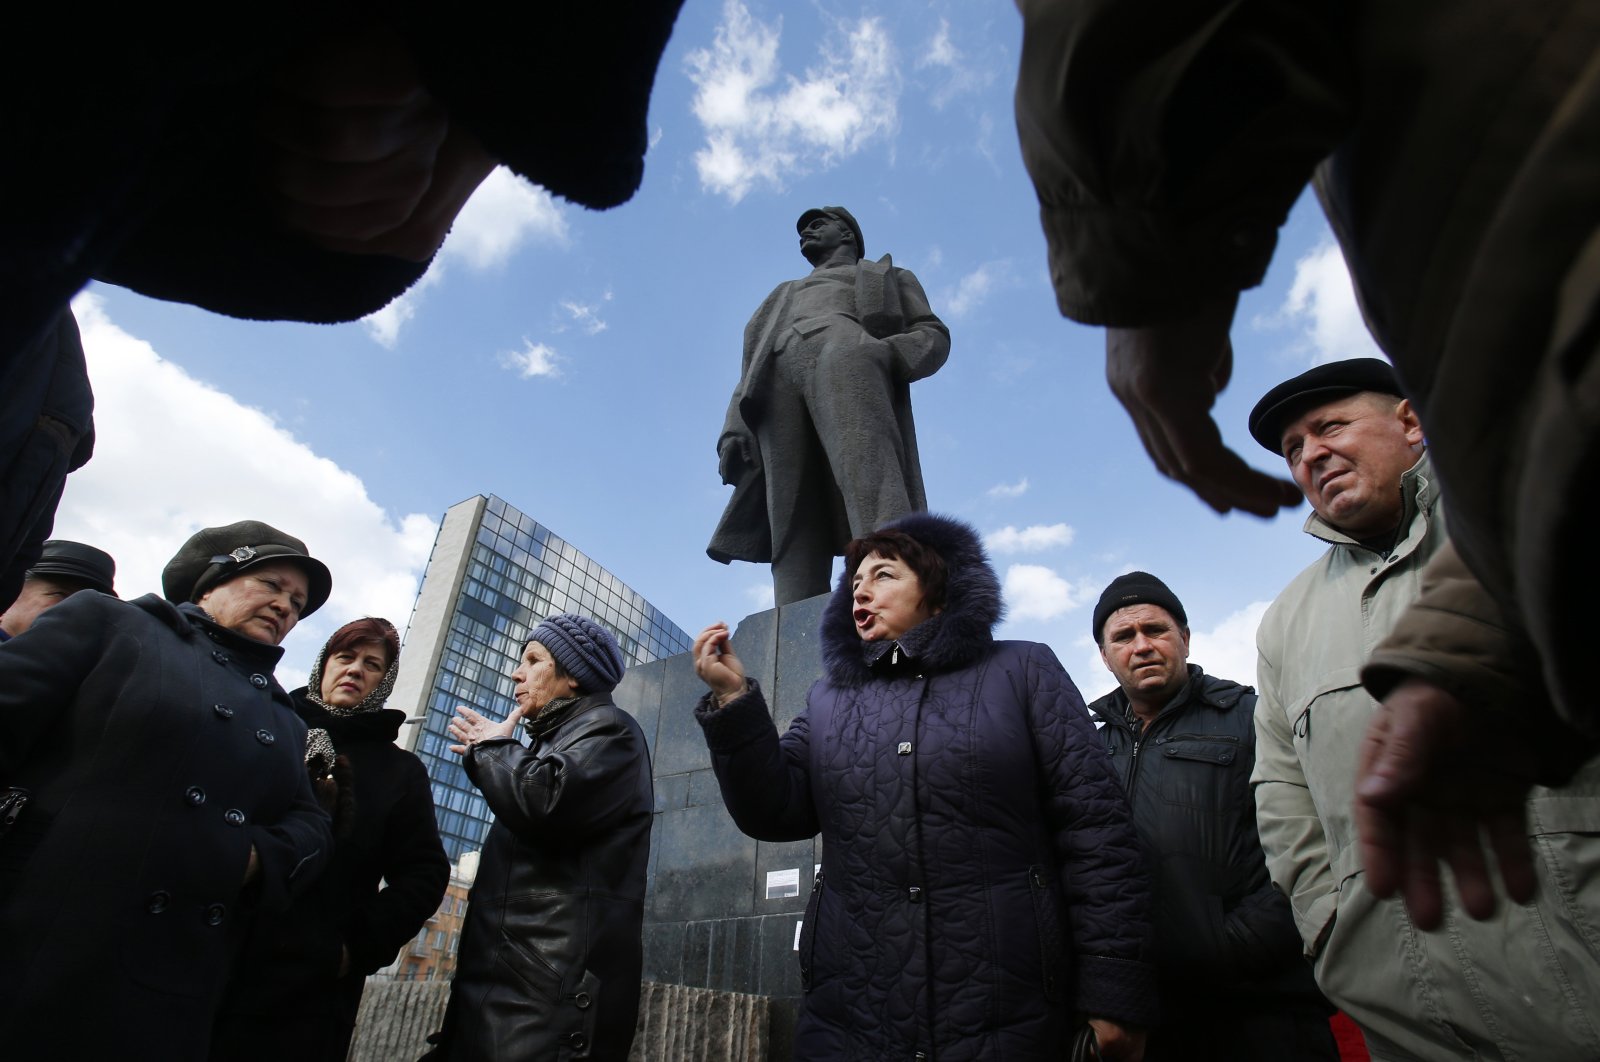 People talk about developments in Ukraine at a central square next to a statue of Soviet revolutionary leader Vladimir Lenin in Donetsk, Ukraine, March 12, 2014. (AP Photo)